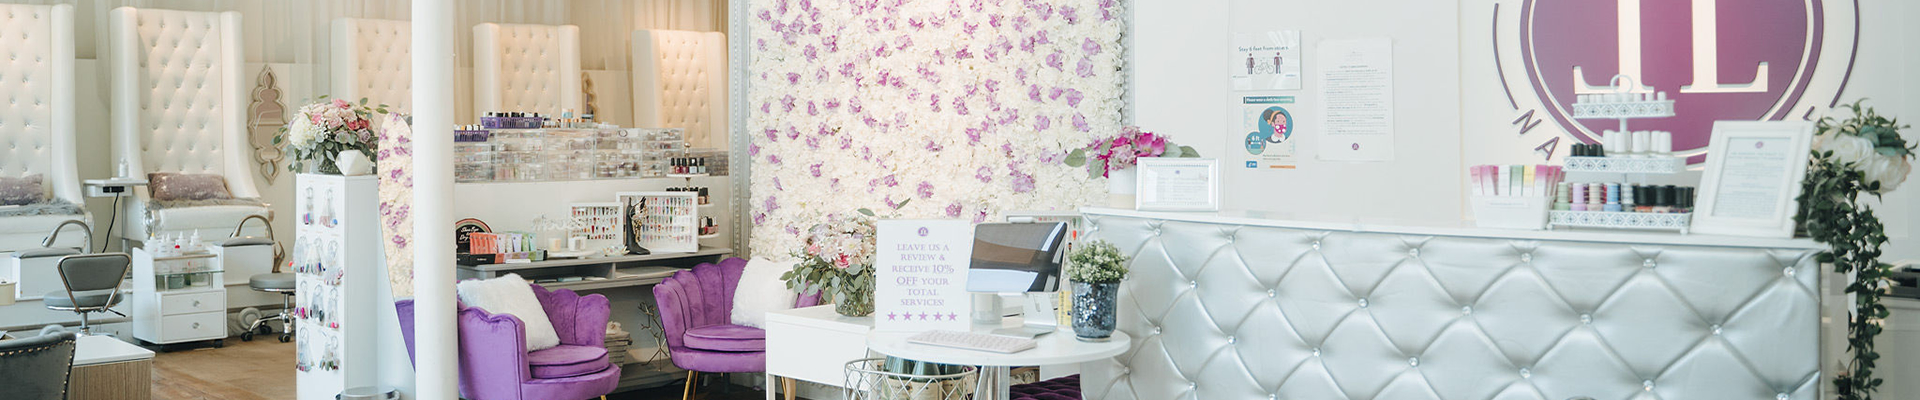 Little Luxuries Nail Lounge reception area with desk and chairs